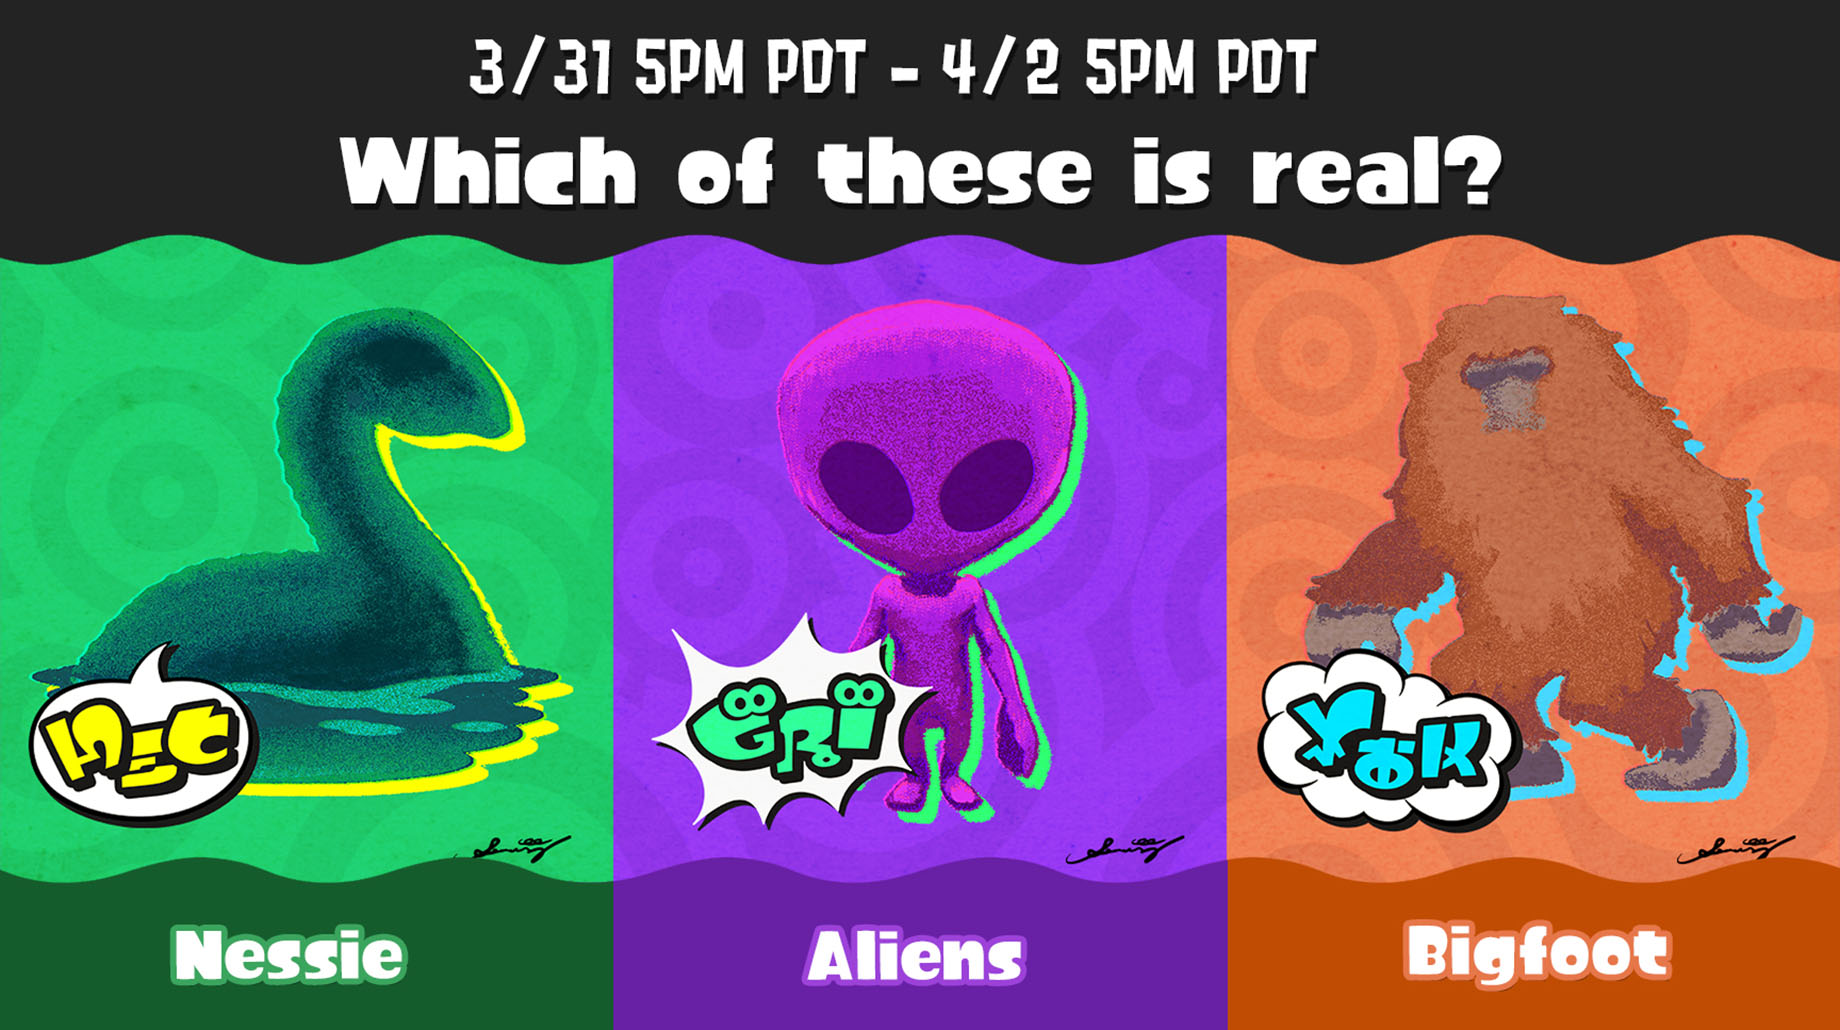 Splatfest signboard: Which of these is real? Nessie, Aliens, or Bigfoot?